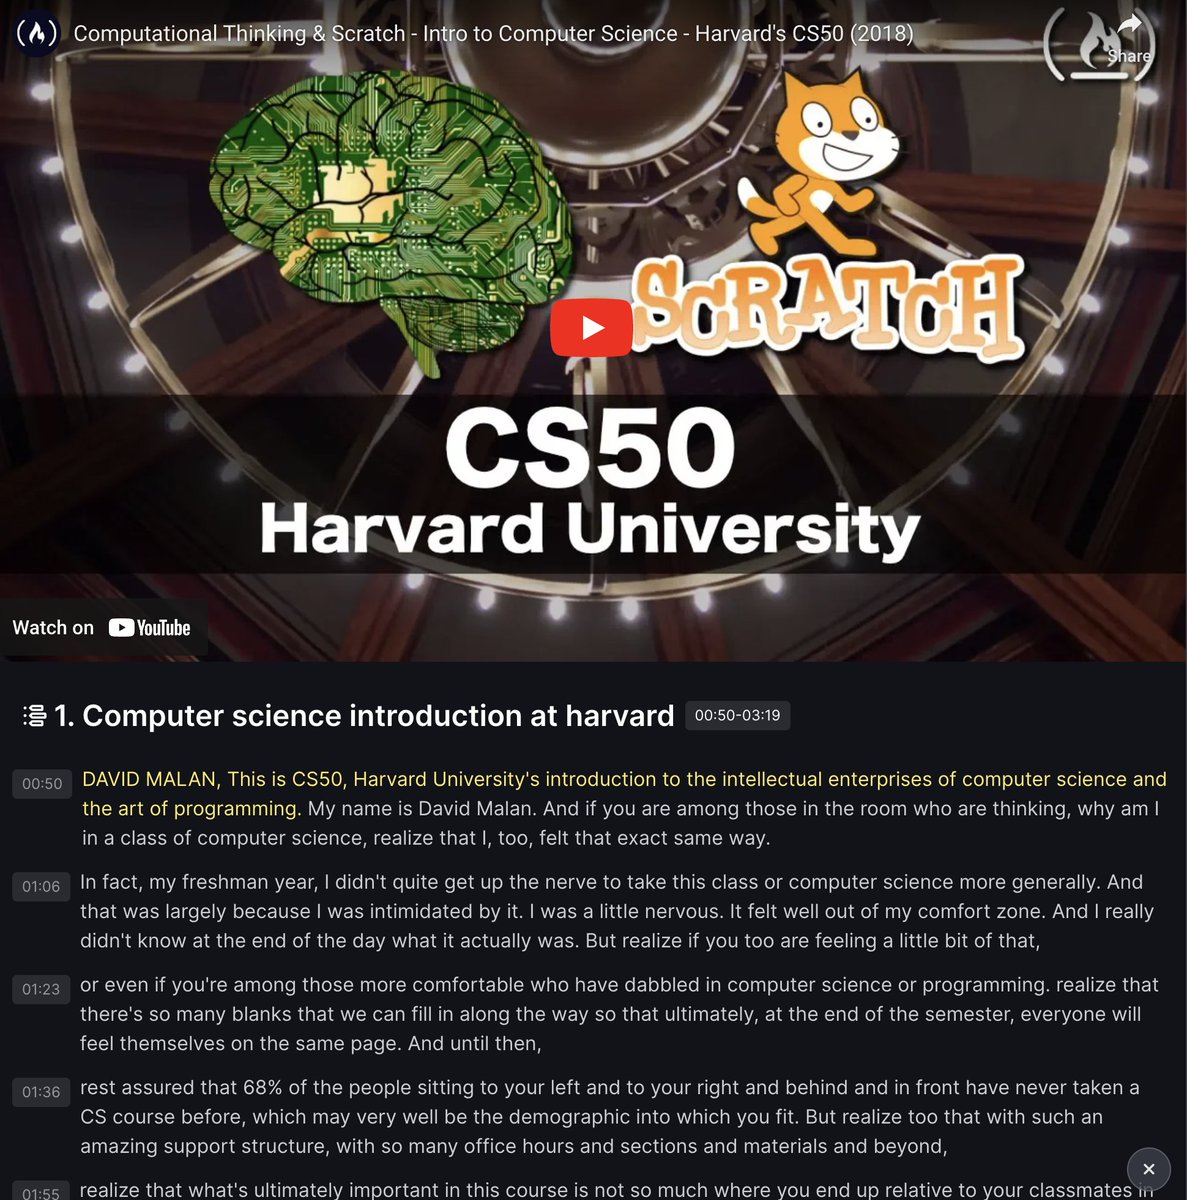 Introduction to Computer Science - Harvard's CS50 #python #programming #developer 1. Computational Thinking & Scratch coursnap.app/share/video/59… 2. C Programming Language coursnap.app/share/video/06… 3. Arrays and Sorting Algorithms coursnap.app/share/video/6d… 4. Memory…